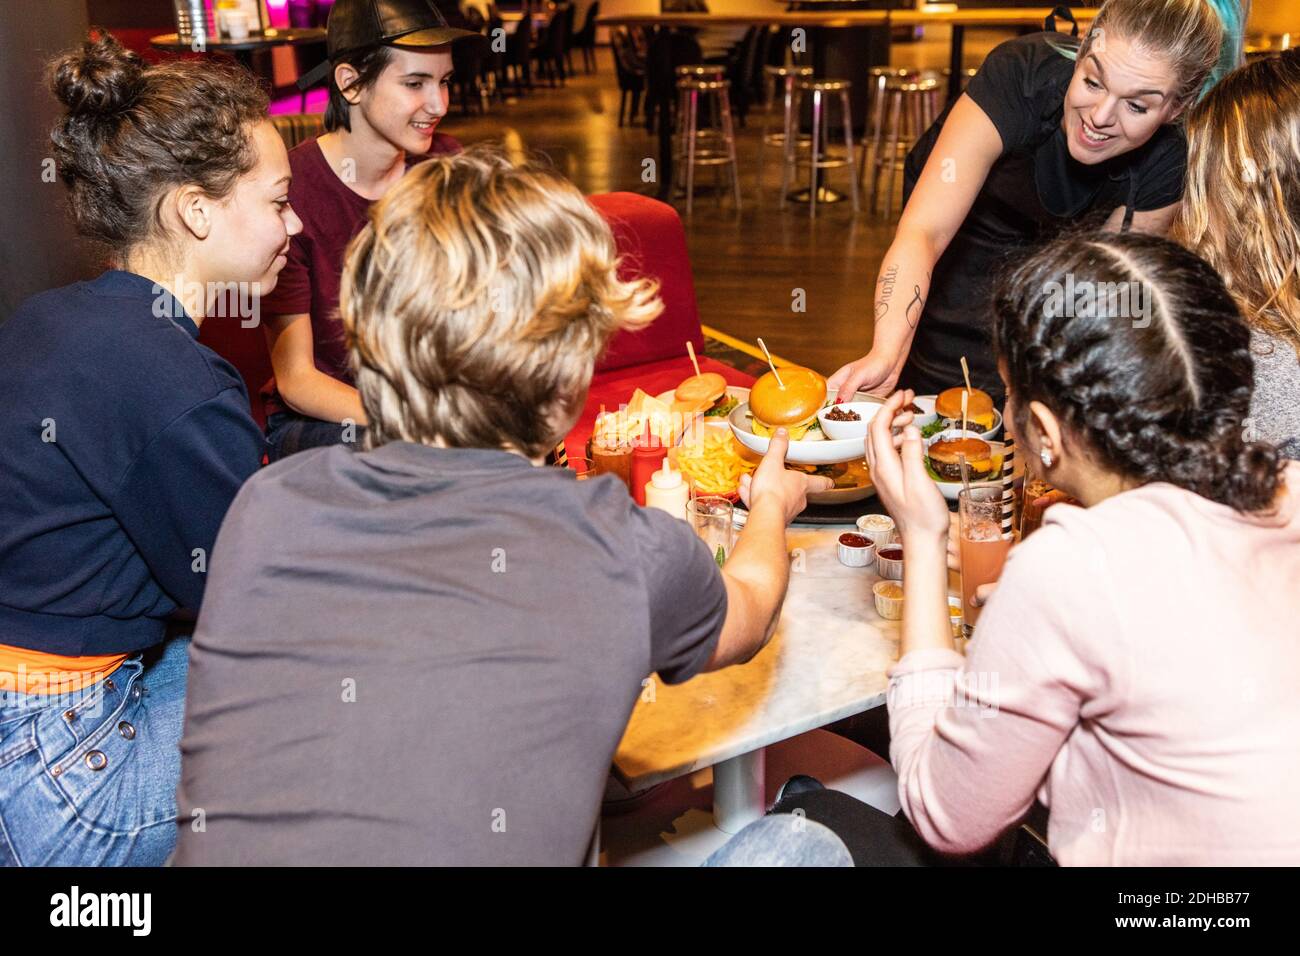 Smiling waitress serving food to multi-ethnic teenagers sitting at restaurant Stock Photo